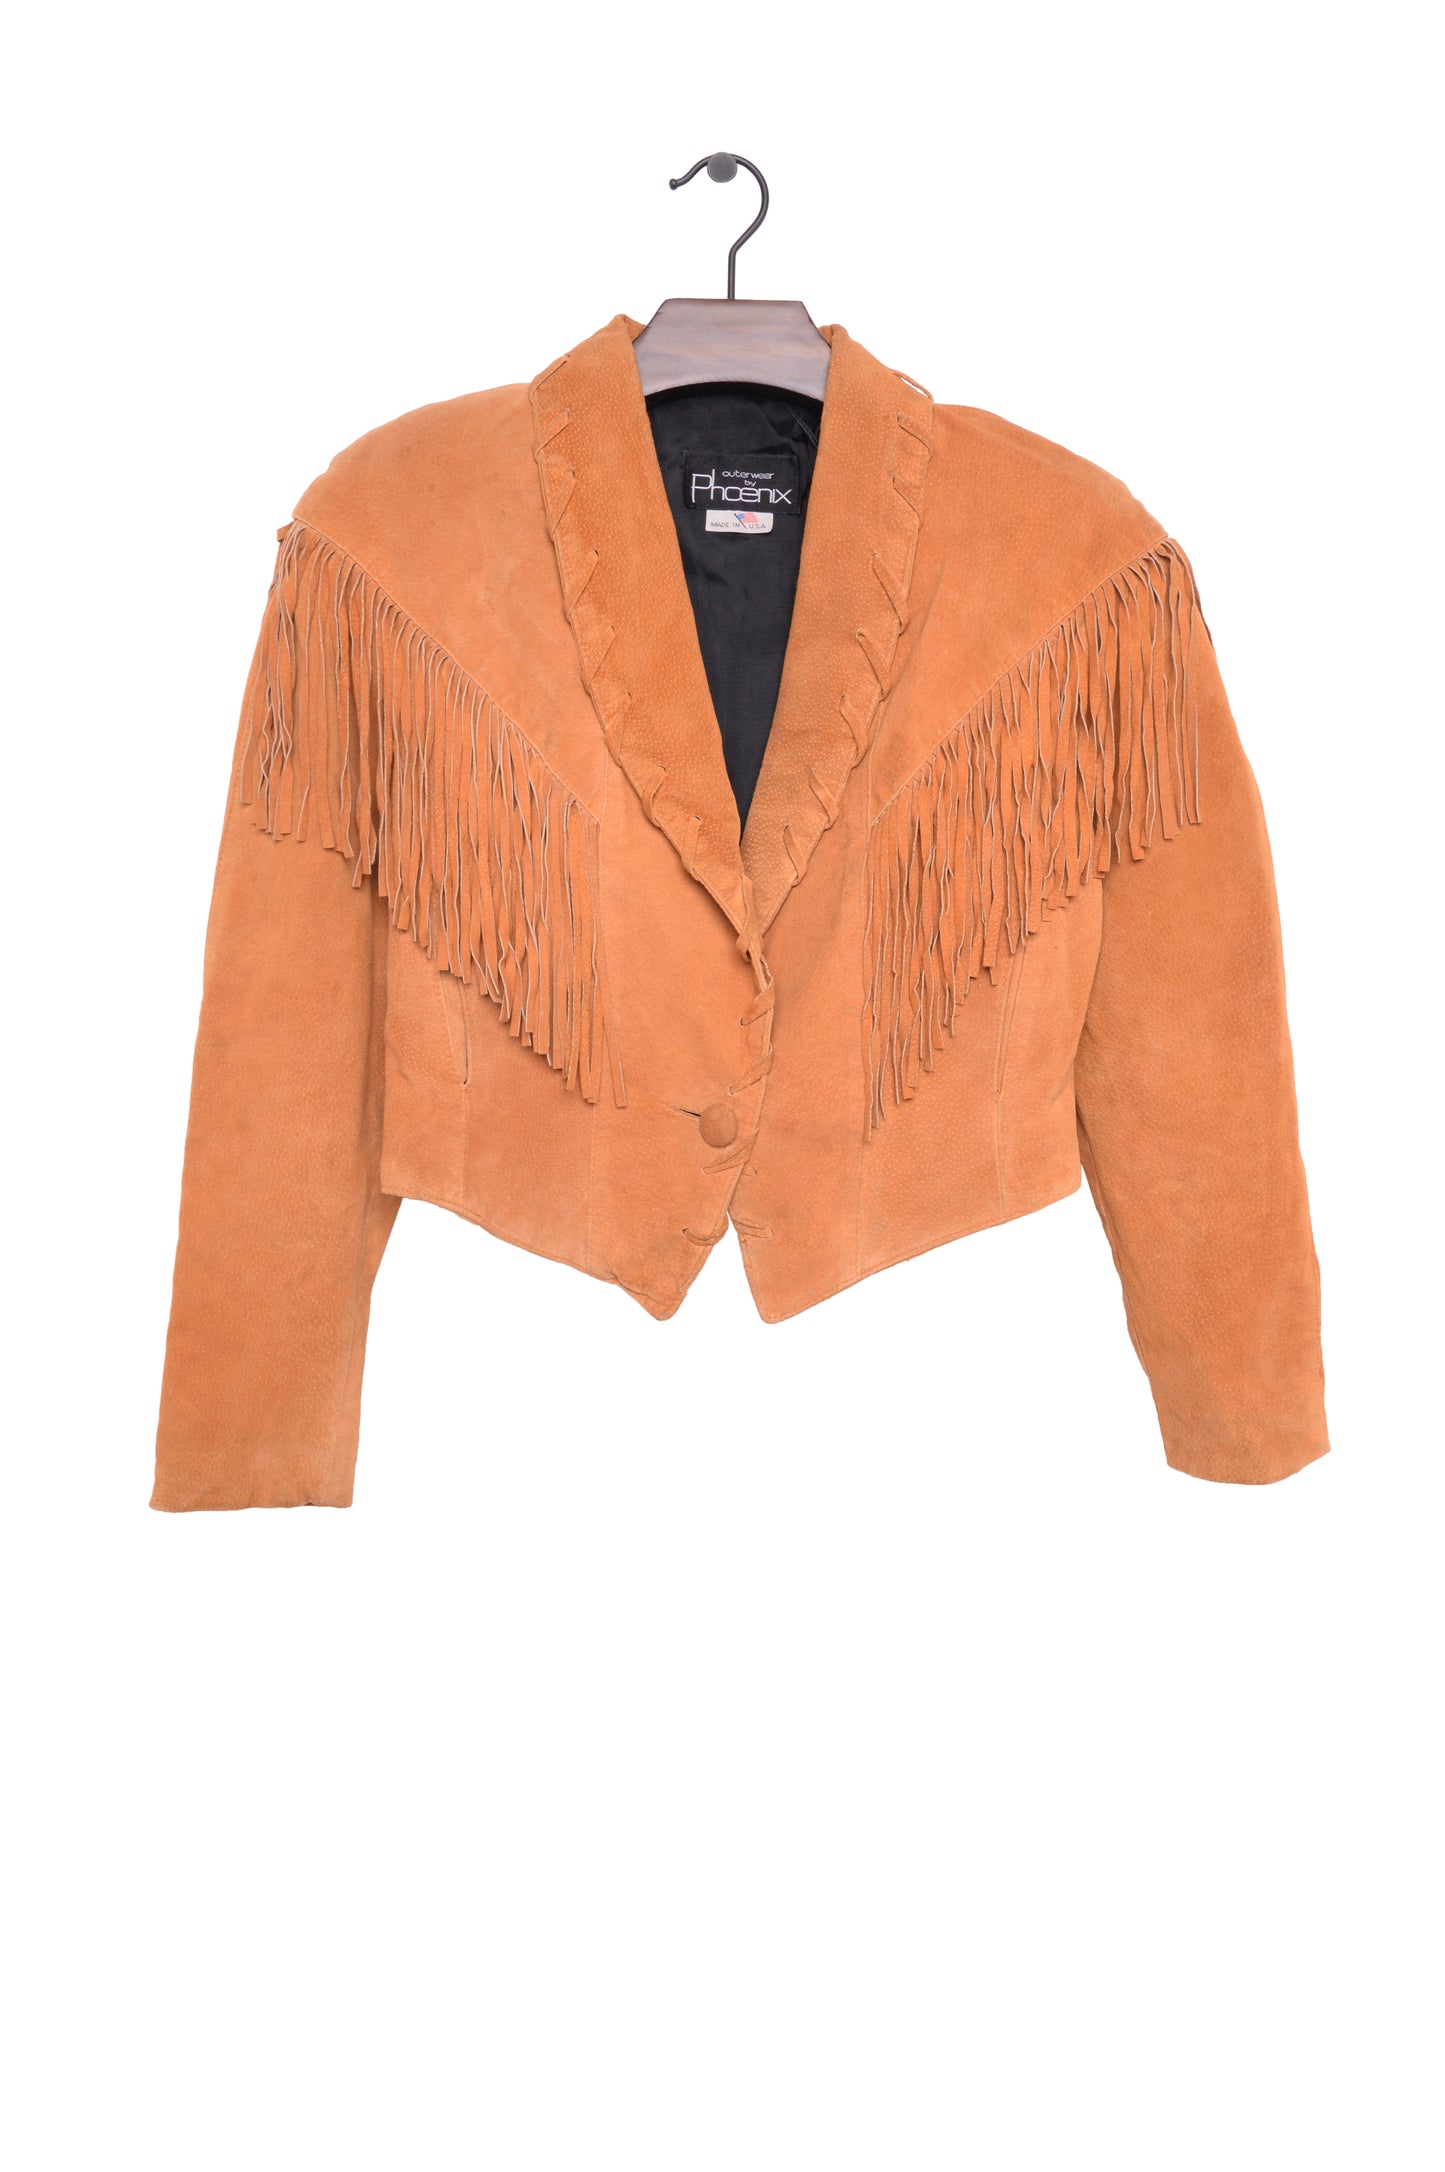 Stitched Suede Cropped Jacket USA